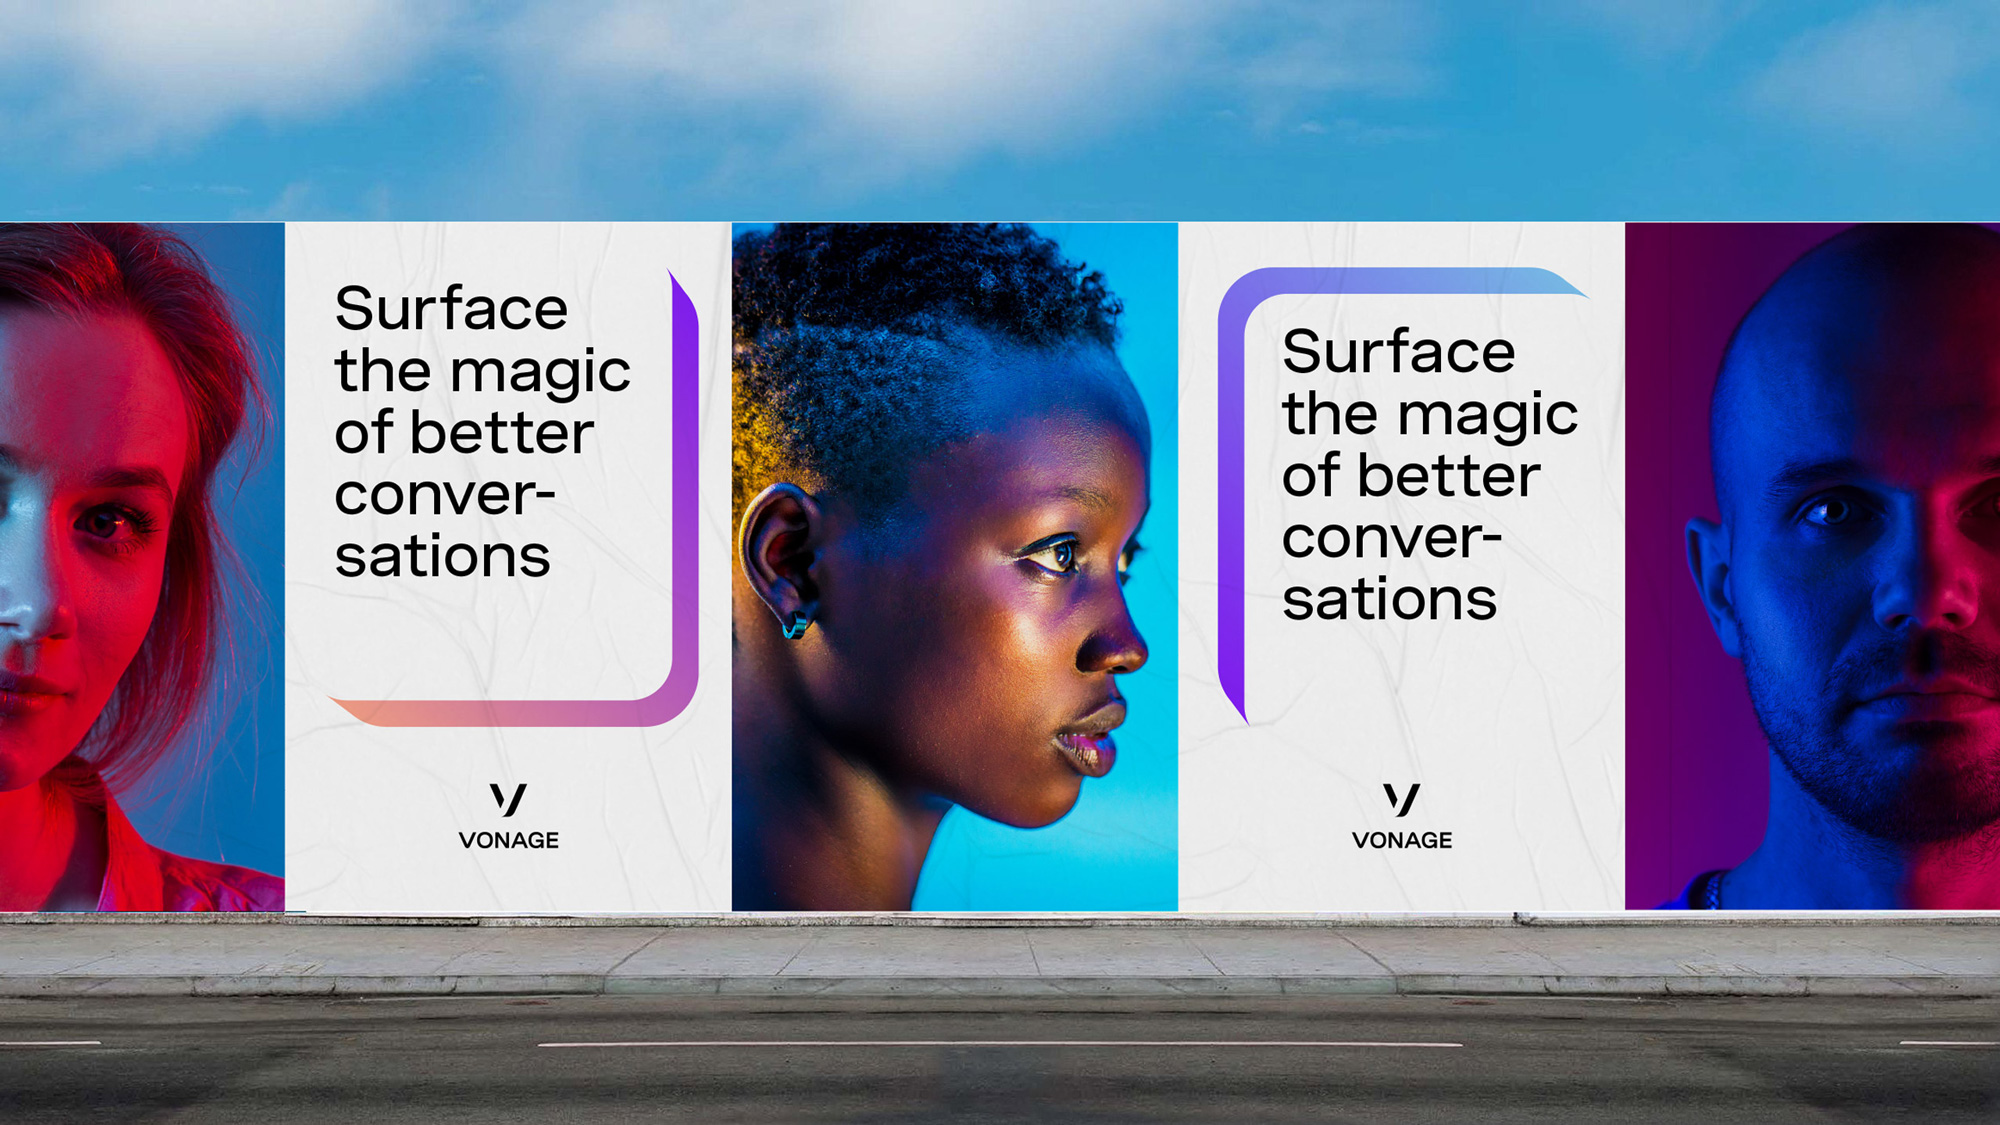 New Logo and Identity for Vonage by Wolff Olins